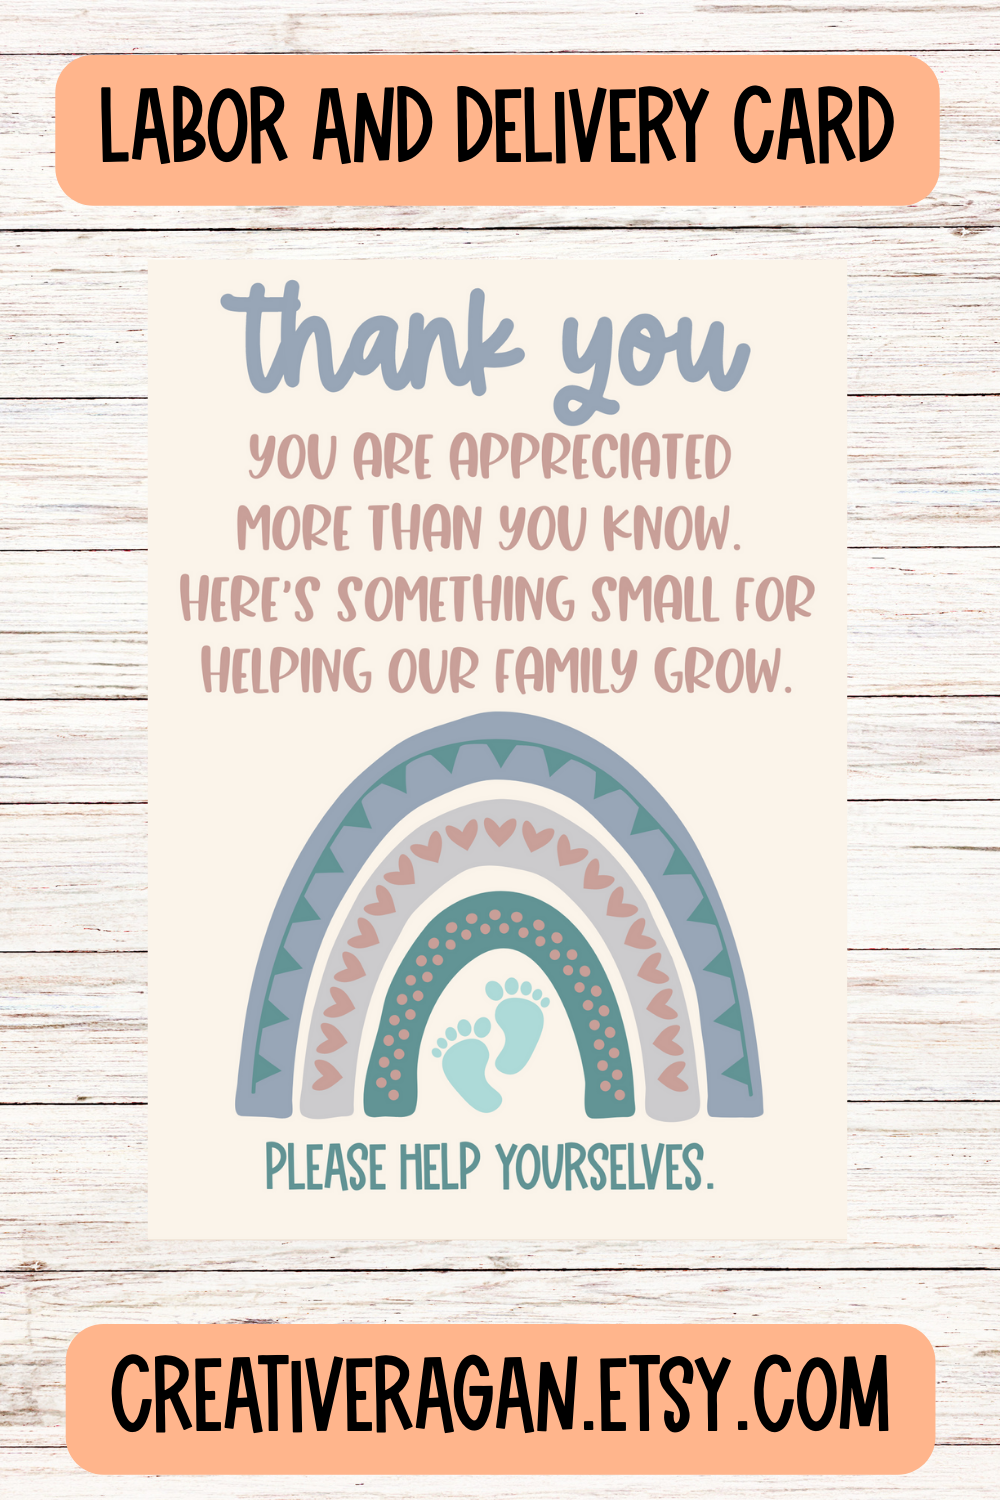 Thank You Card For Labor And Delivery Nurses And Staff Delivery Nurse Gifts Thank You Baskets Thank You Cards